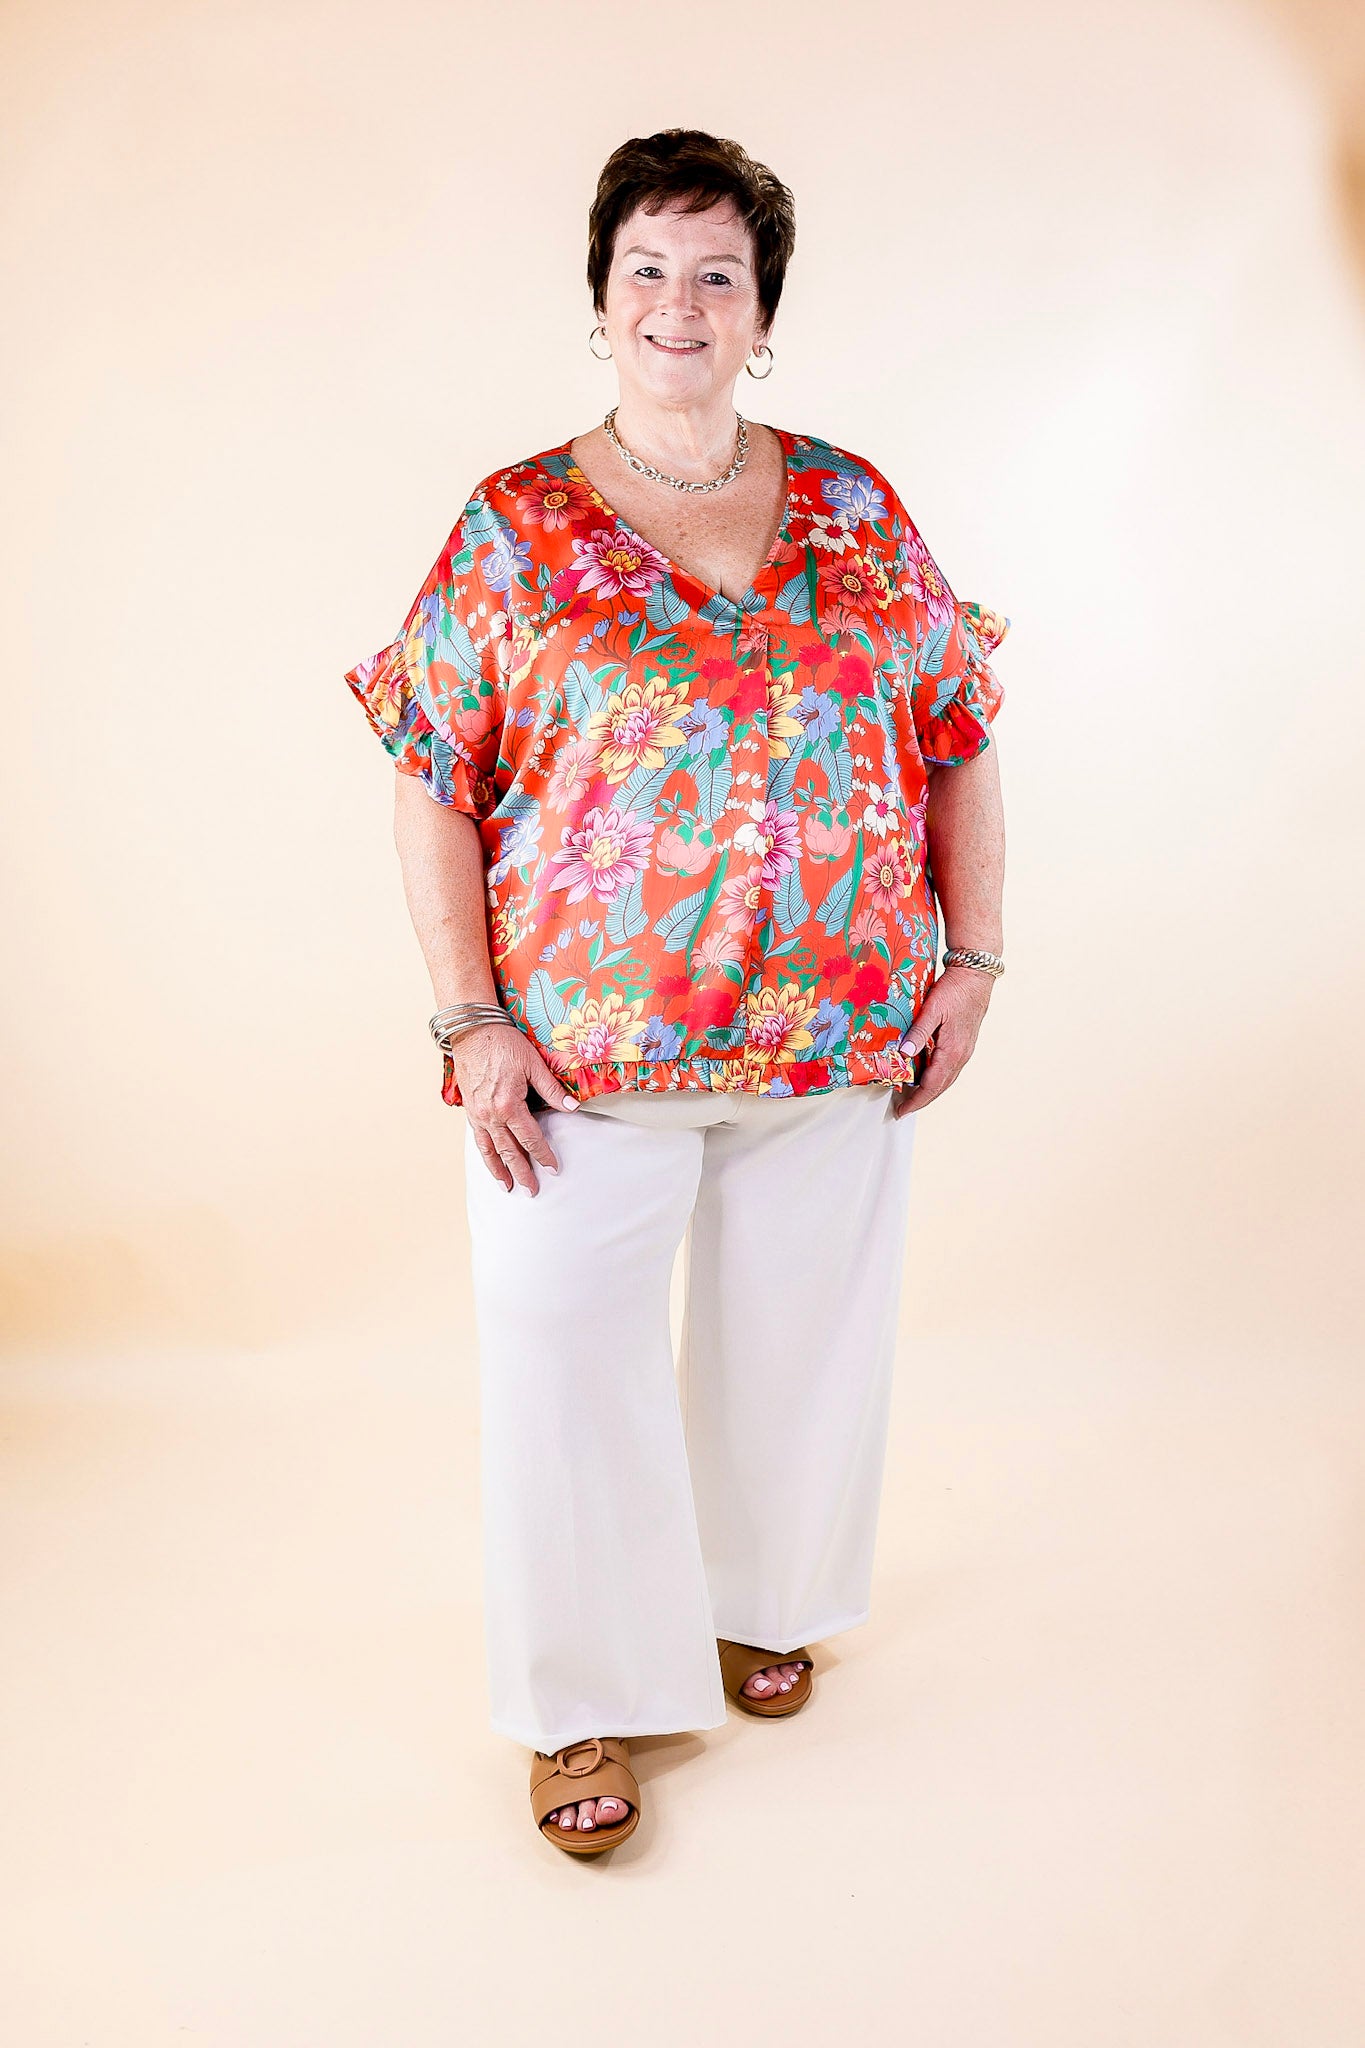 Blissful Mindset Floral V Neck Top with Short Ruffle Sleeves in Orange - Giddy Up Glamour Boutique